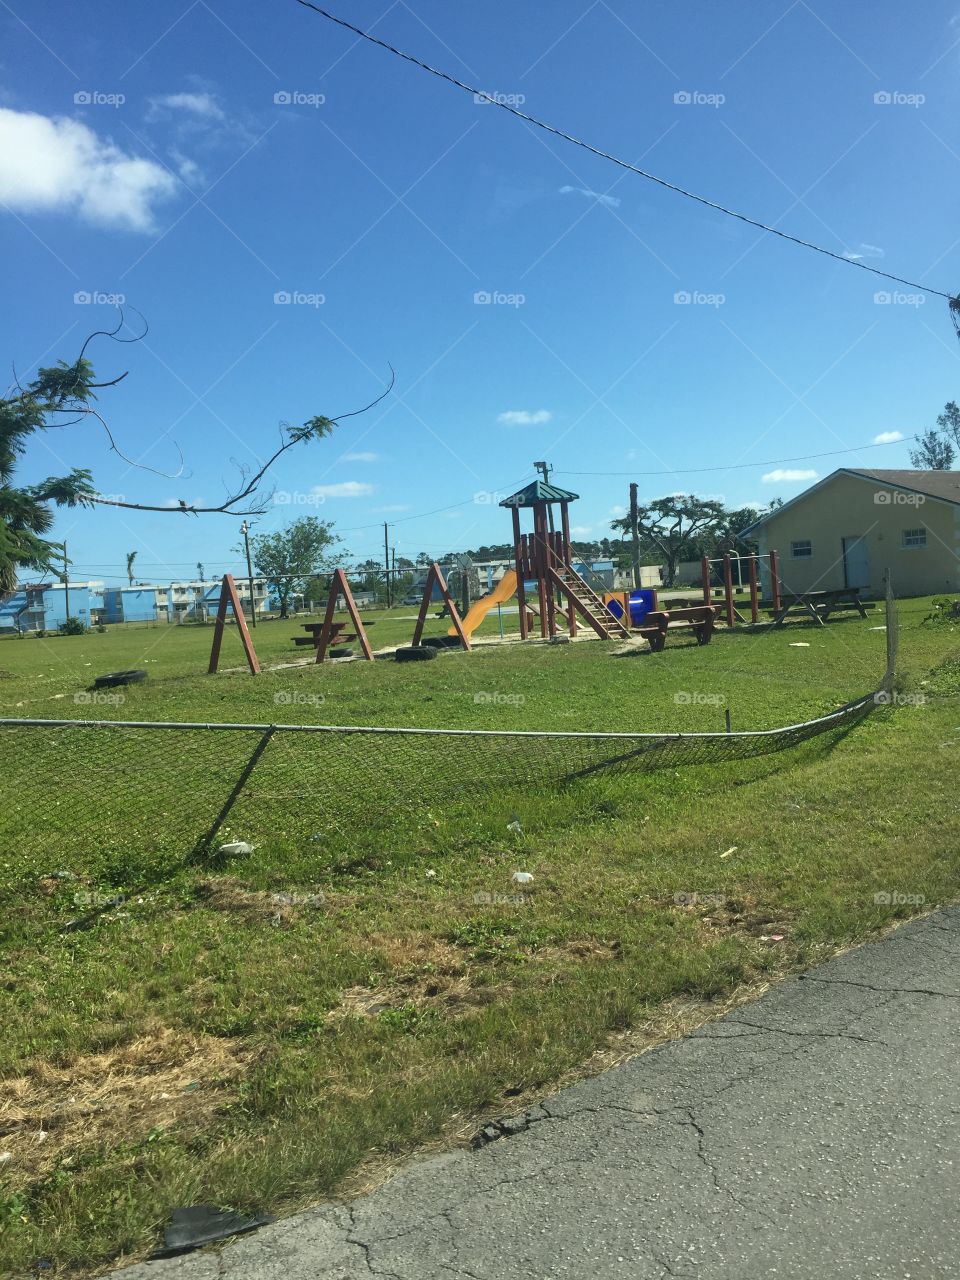 A native man in the Bahamas took my family on a tour of the island and I saw this playground. I was shocked about the condition and how it is still being used, really opened my eyes as to how often we take things for granted!